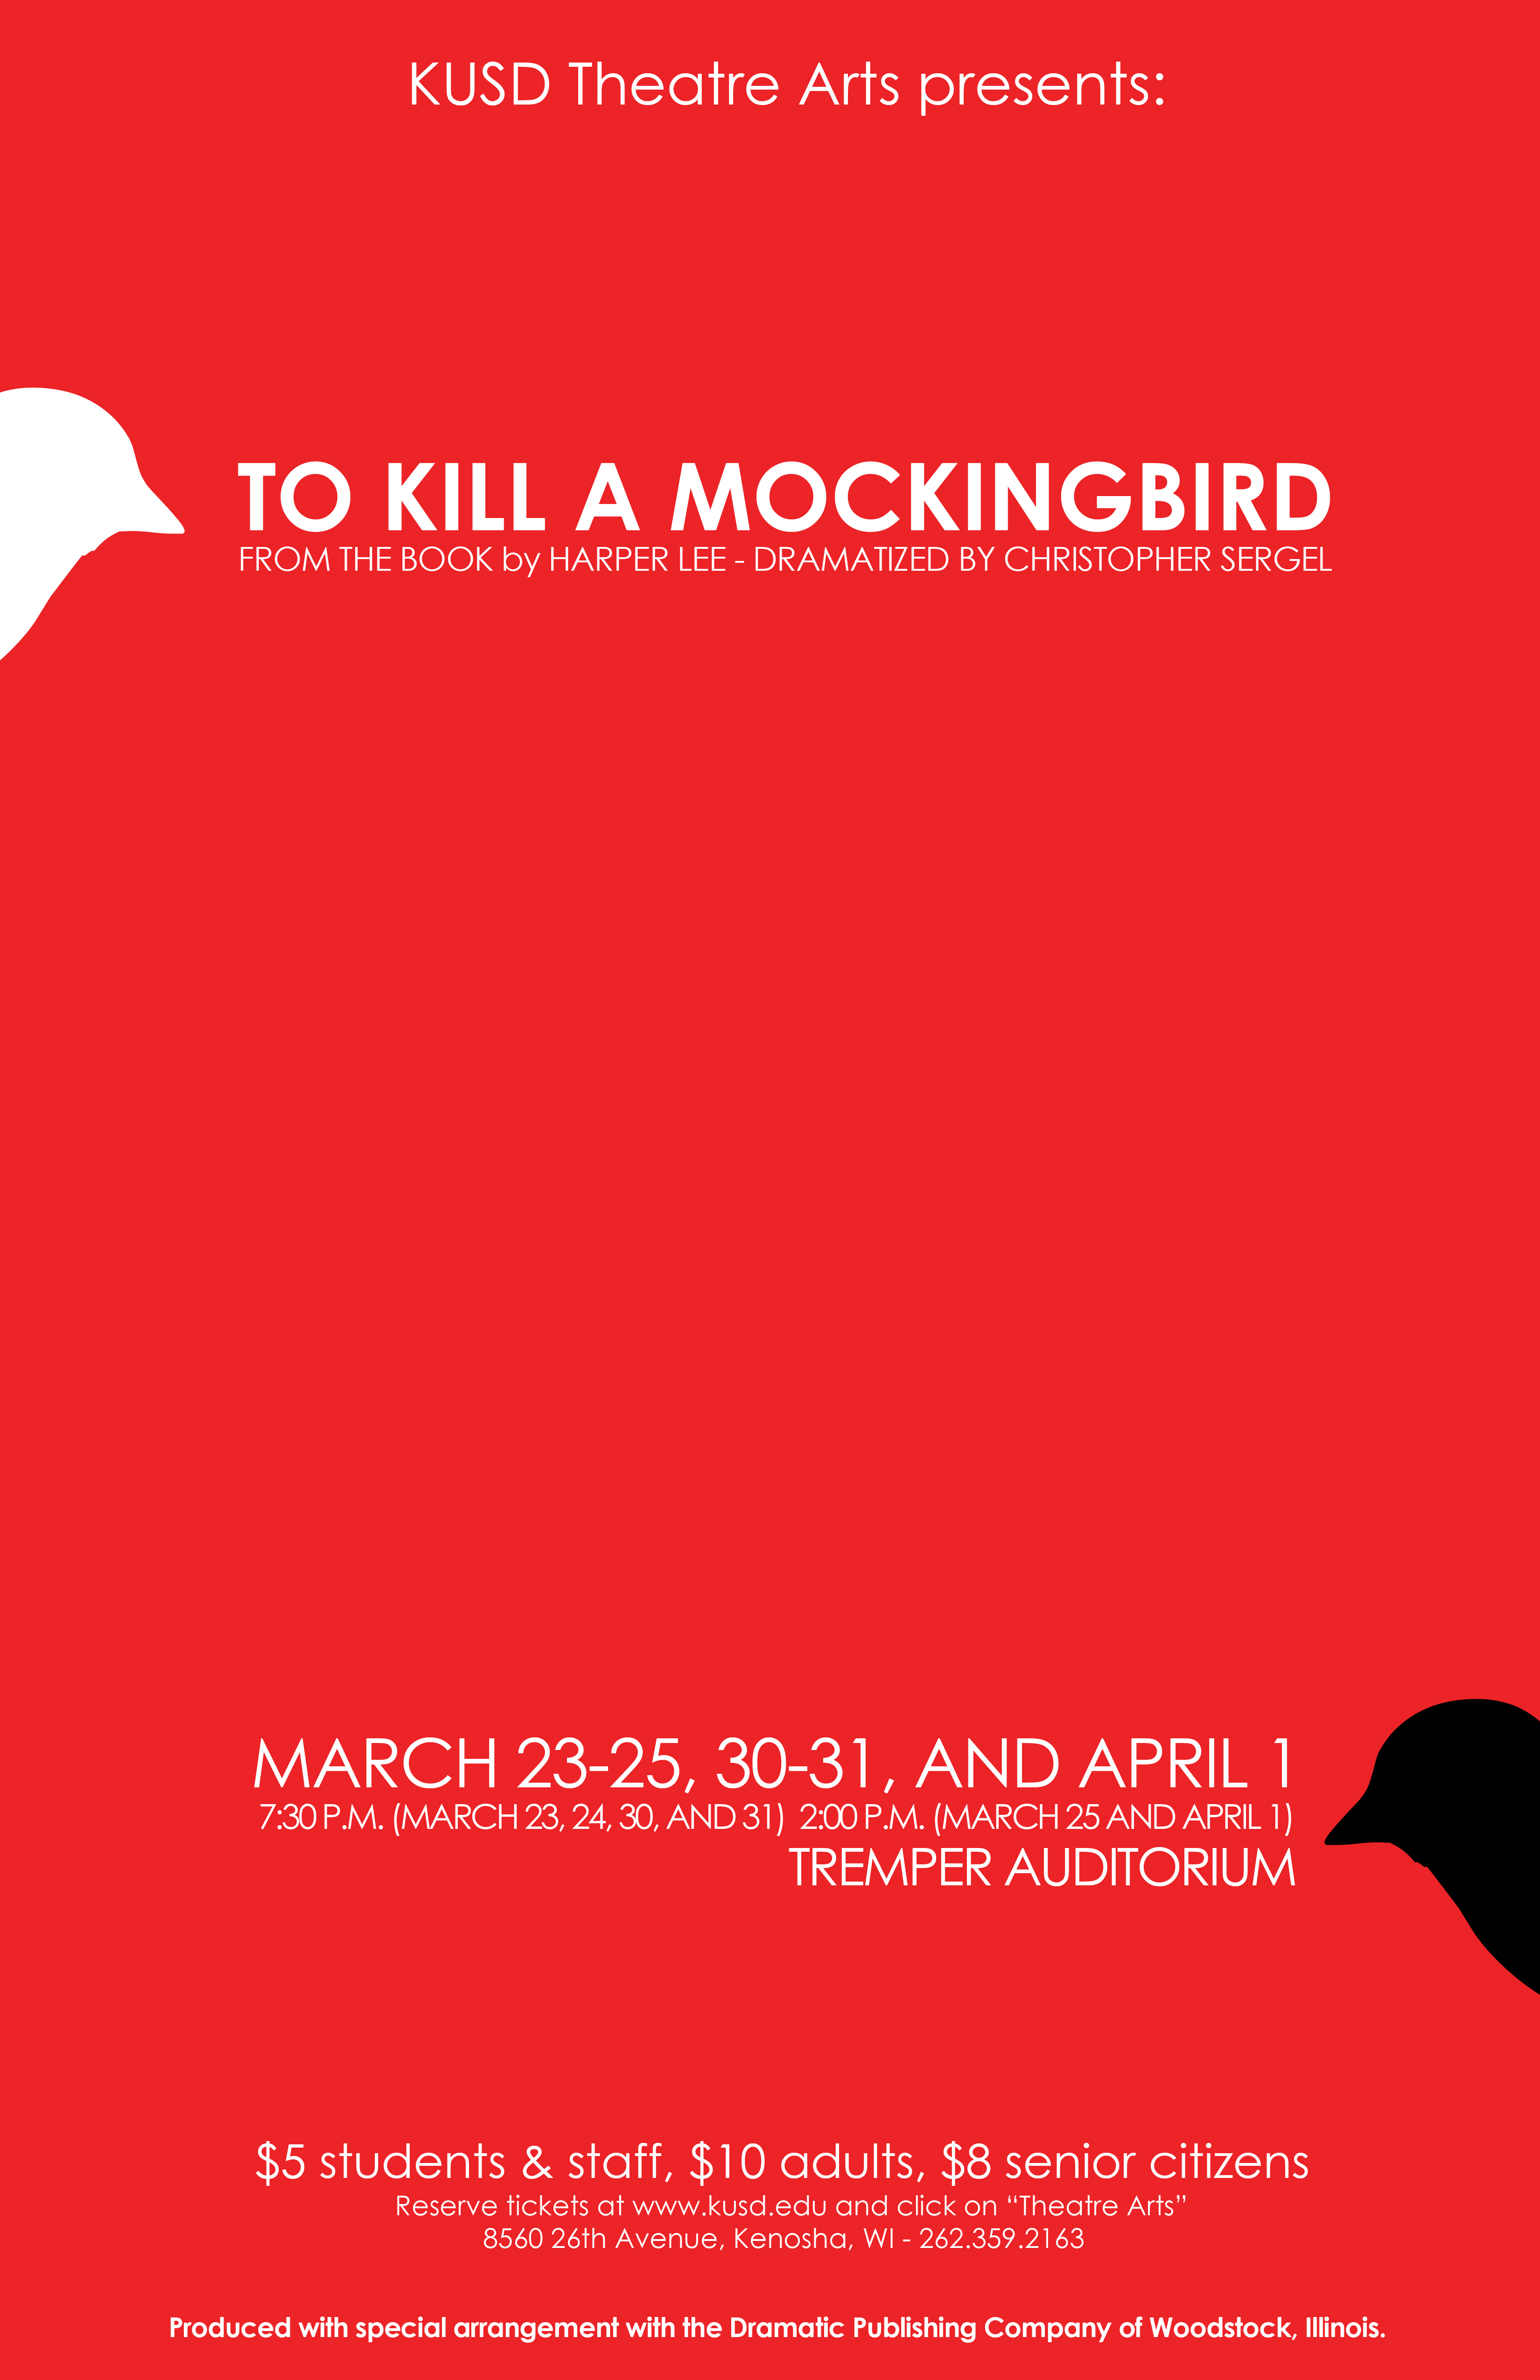 The poster for To Kill A Mockingbird